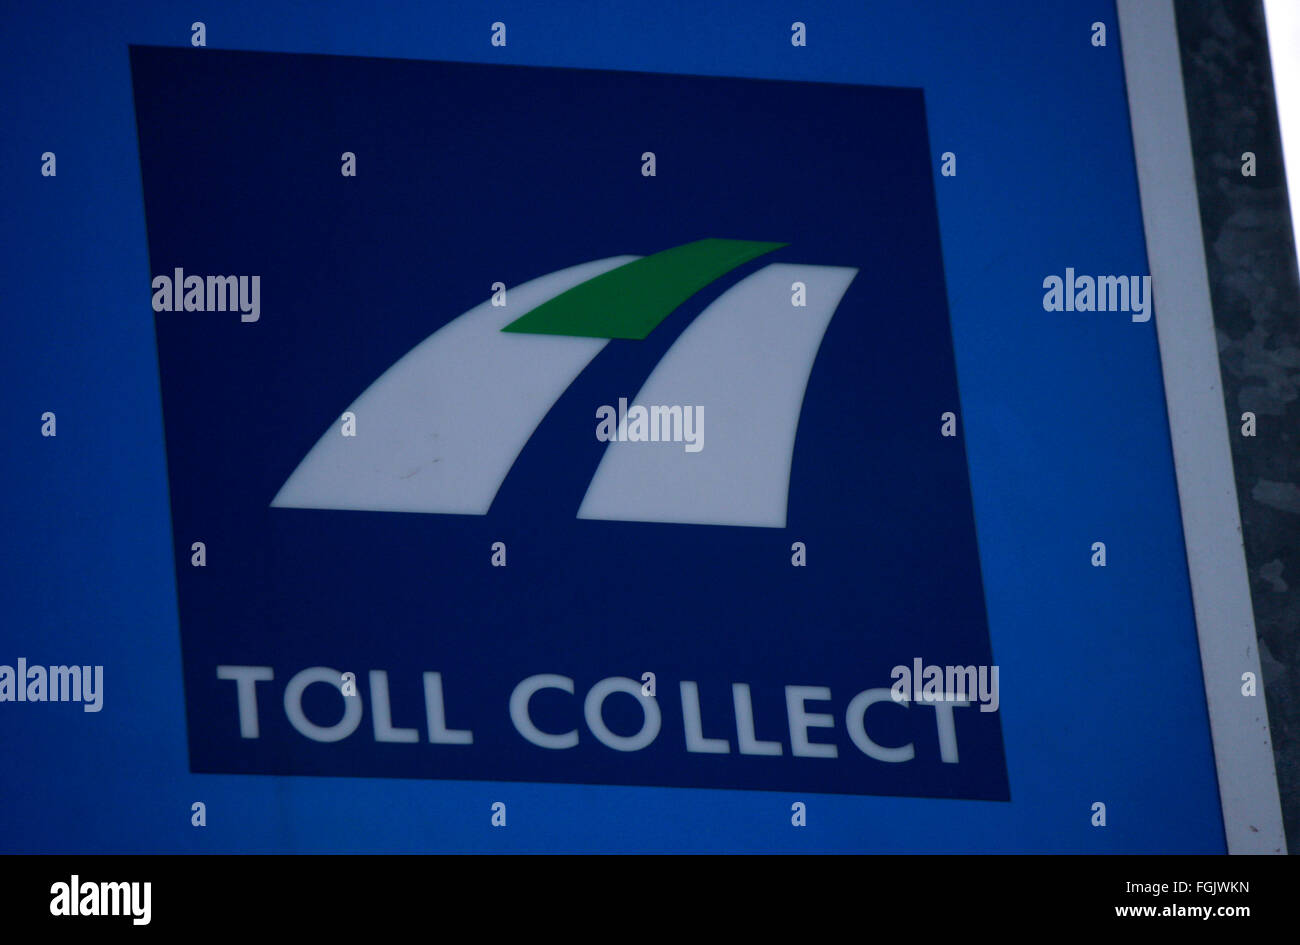 Markenname: "Toll Collect", Berlin. Stockfoto